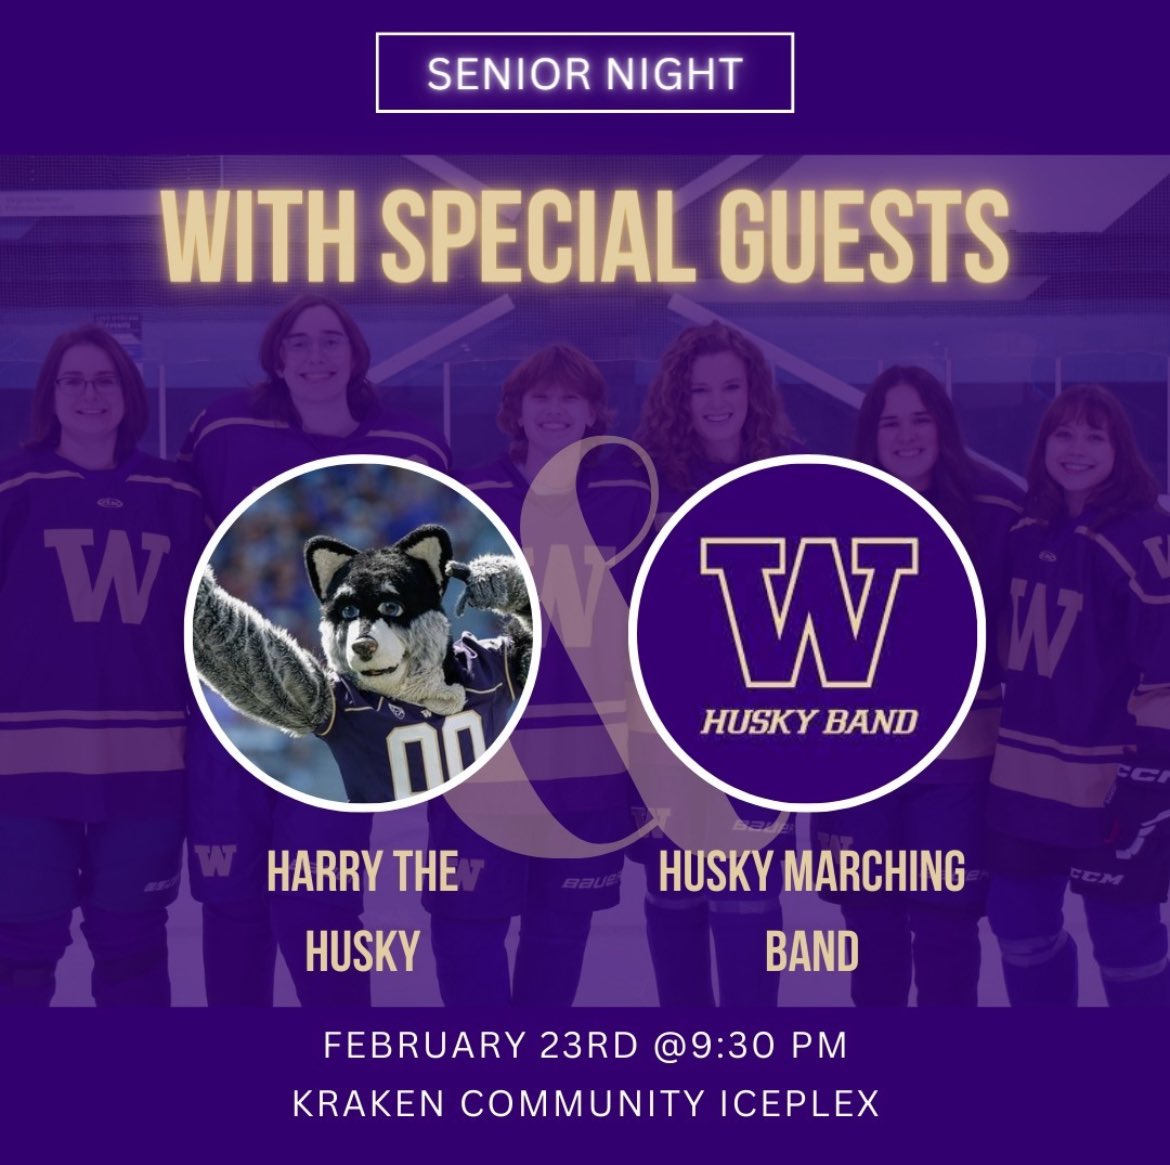 Senior Night Tonight! Come celebrate our seniors in the final game of the season. PLUS we have special guests that are sure to make the night feel extra special! 

Don’t miss out on some great hockey, an epic atmosphere, and again great hockey 🏒💜💛

#CollegeHockey #HuskyHockey